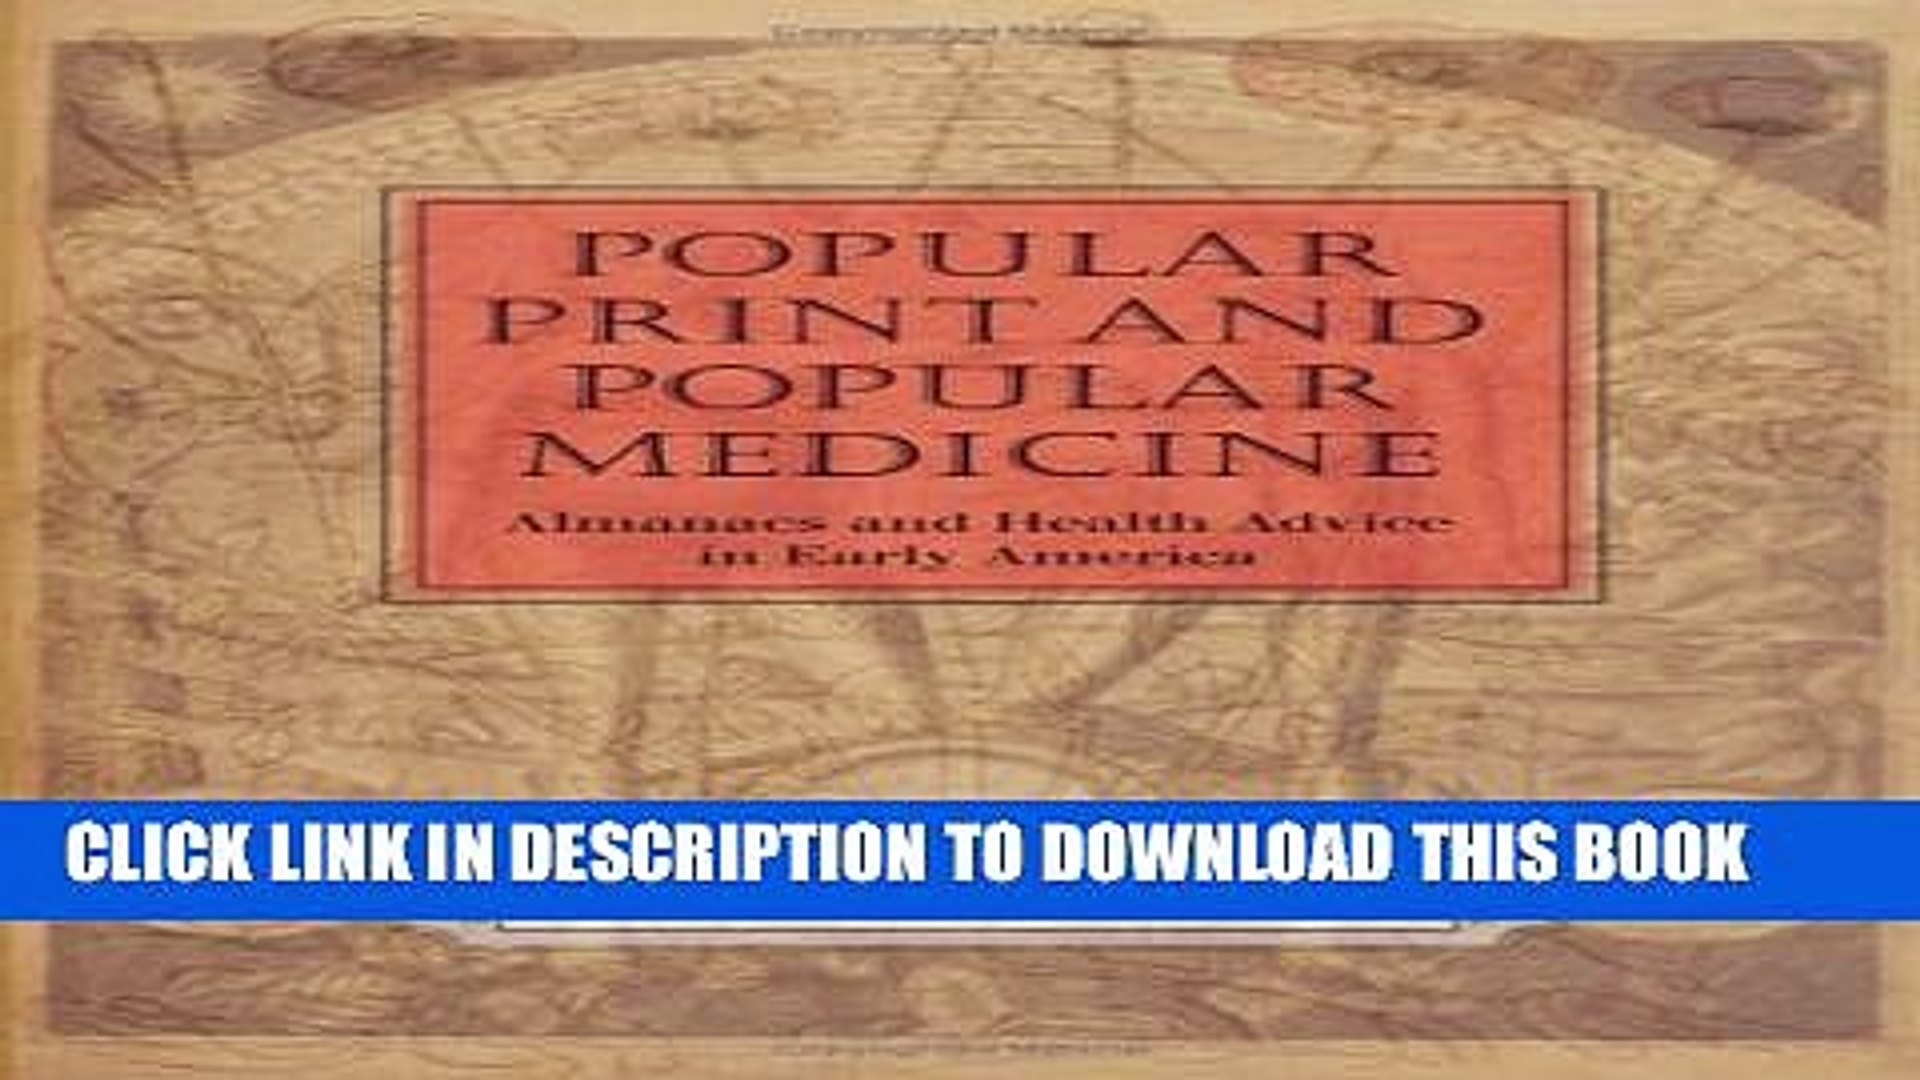 New Book Popular Print and Popular Medicine: Almanacs and Health Advice in Early America (Studies